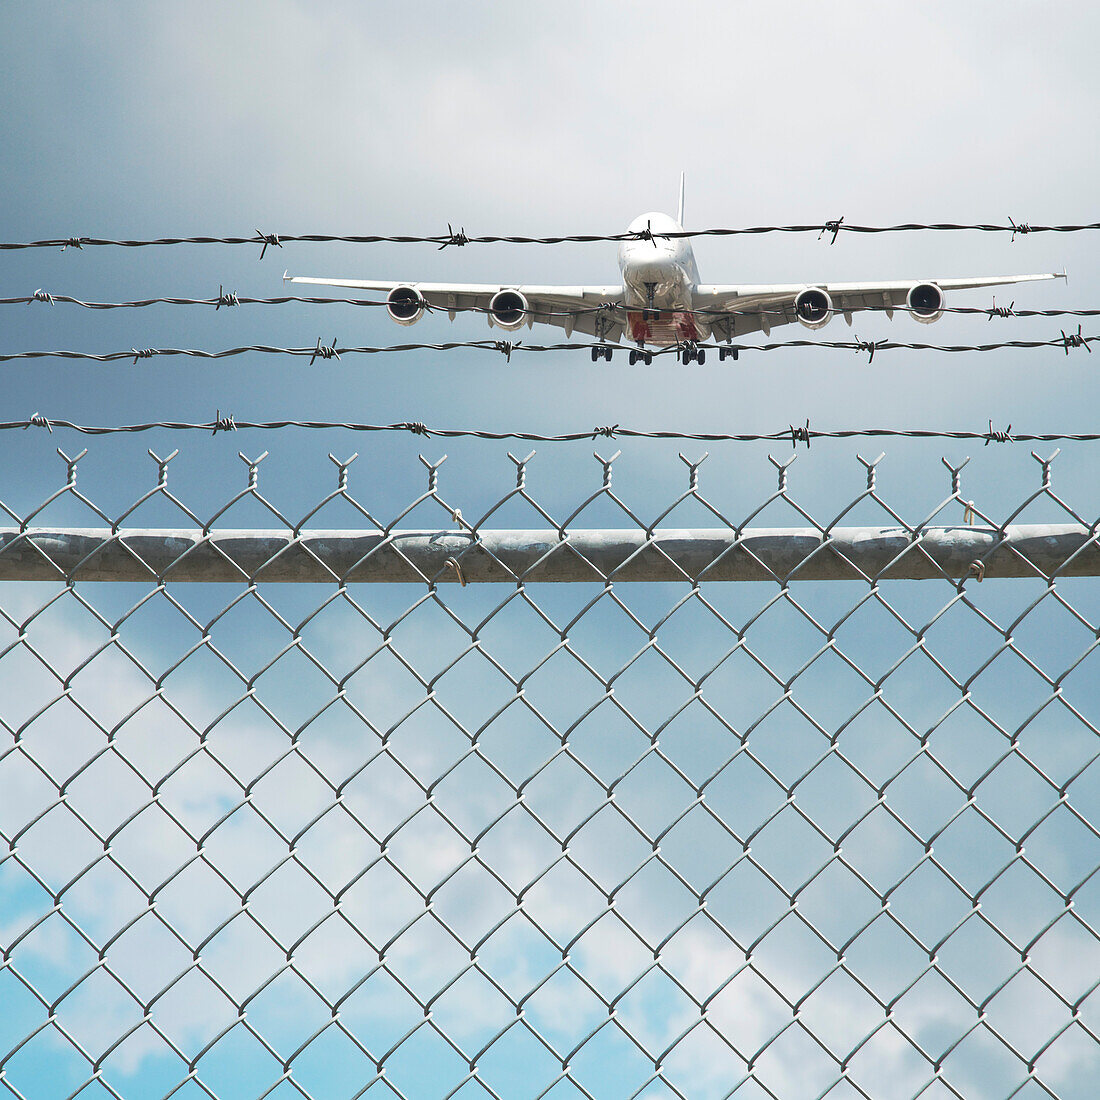 Jumbo Jet and Chain Link Fence with Barbed Wire, Pearson International Airport, Toronto, Ontario, Canada